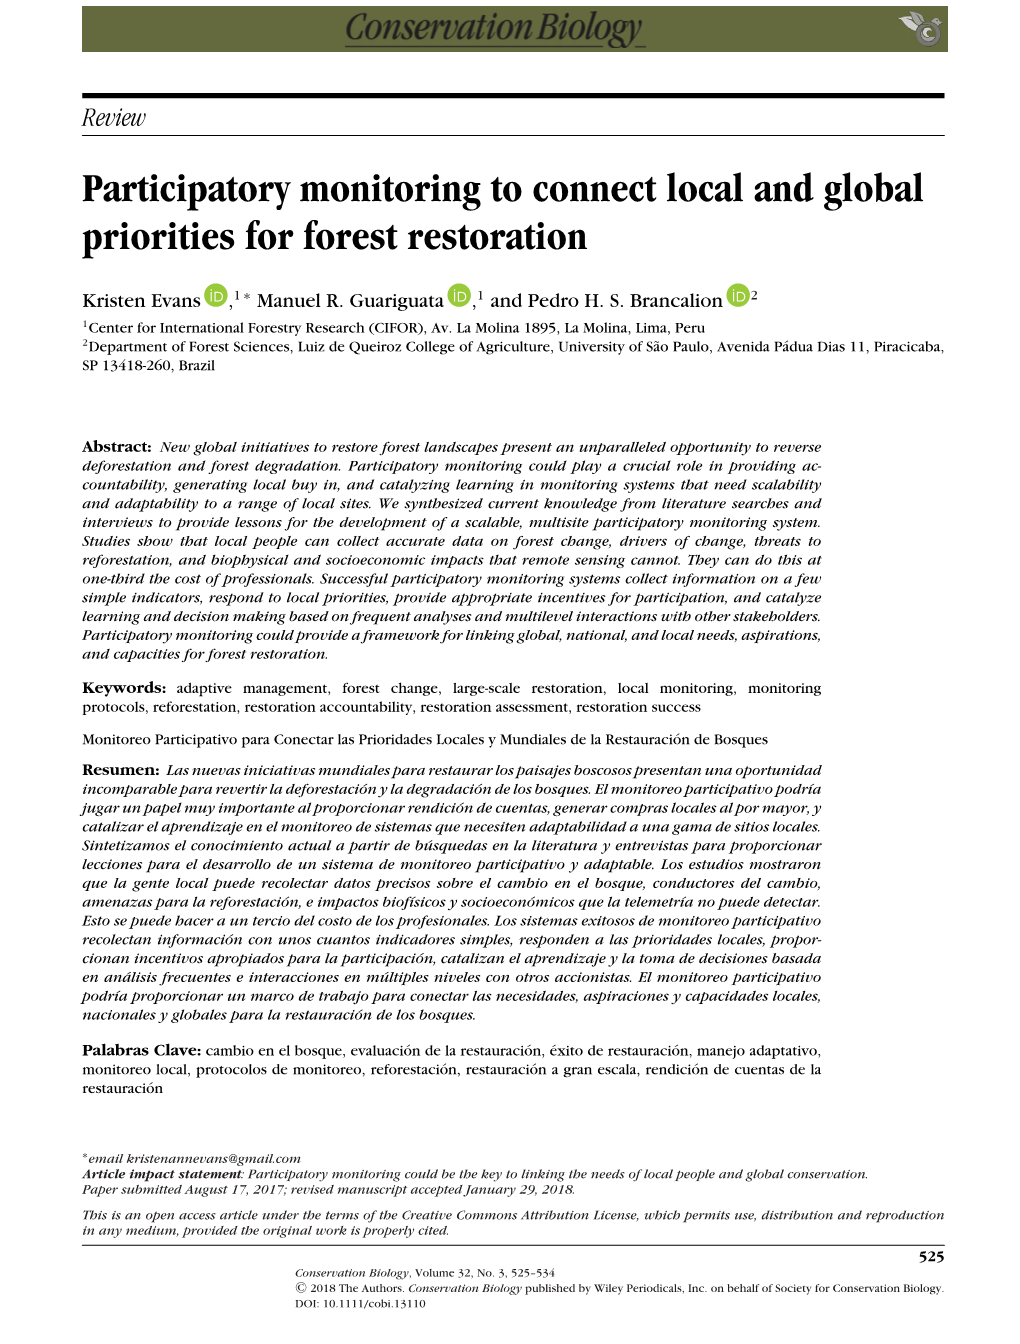 Participatory Monitoring to Connect Local and Global Priorities for Forest Restoration